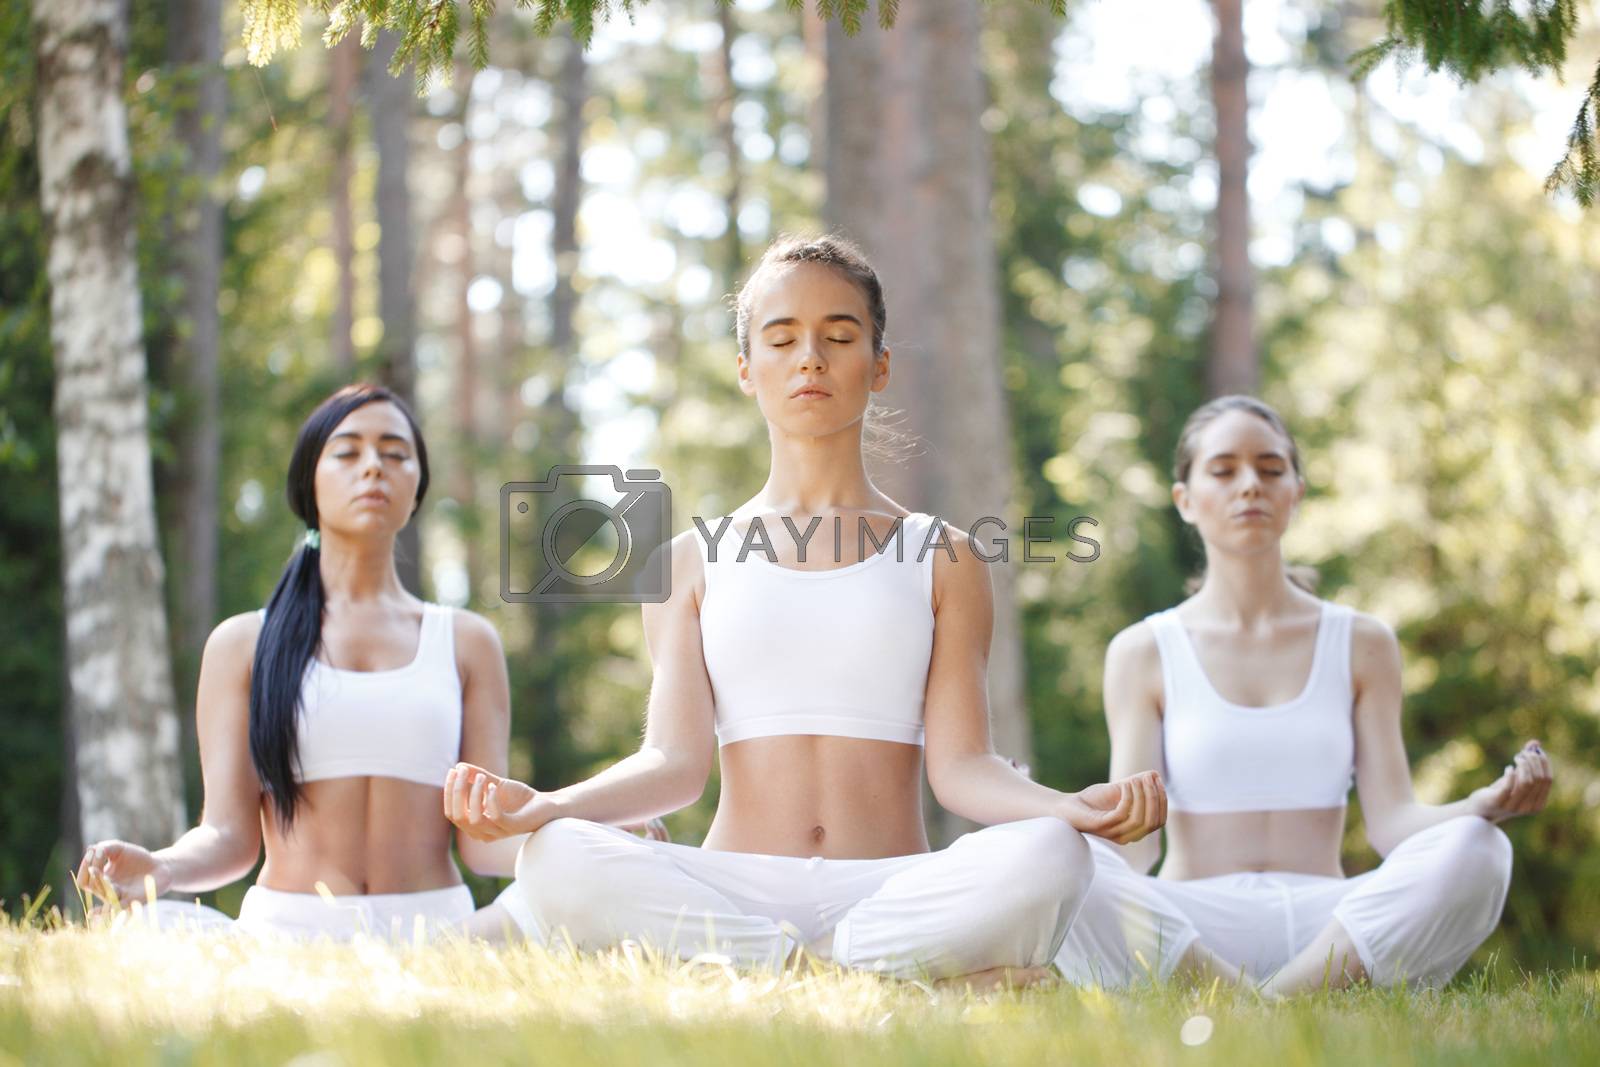 Royalty free image of Yoga group training at park by ALotOfPeople